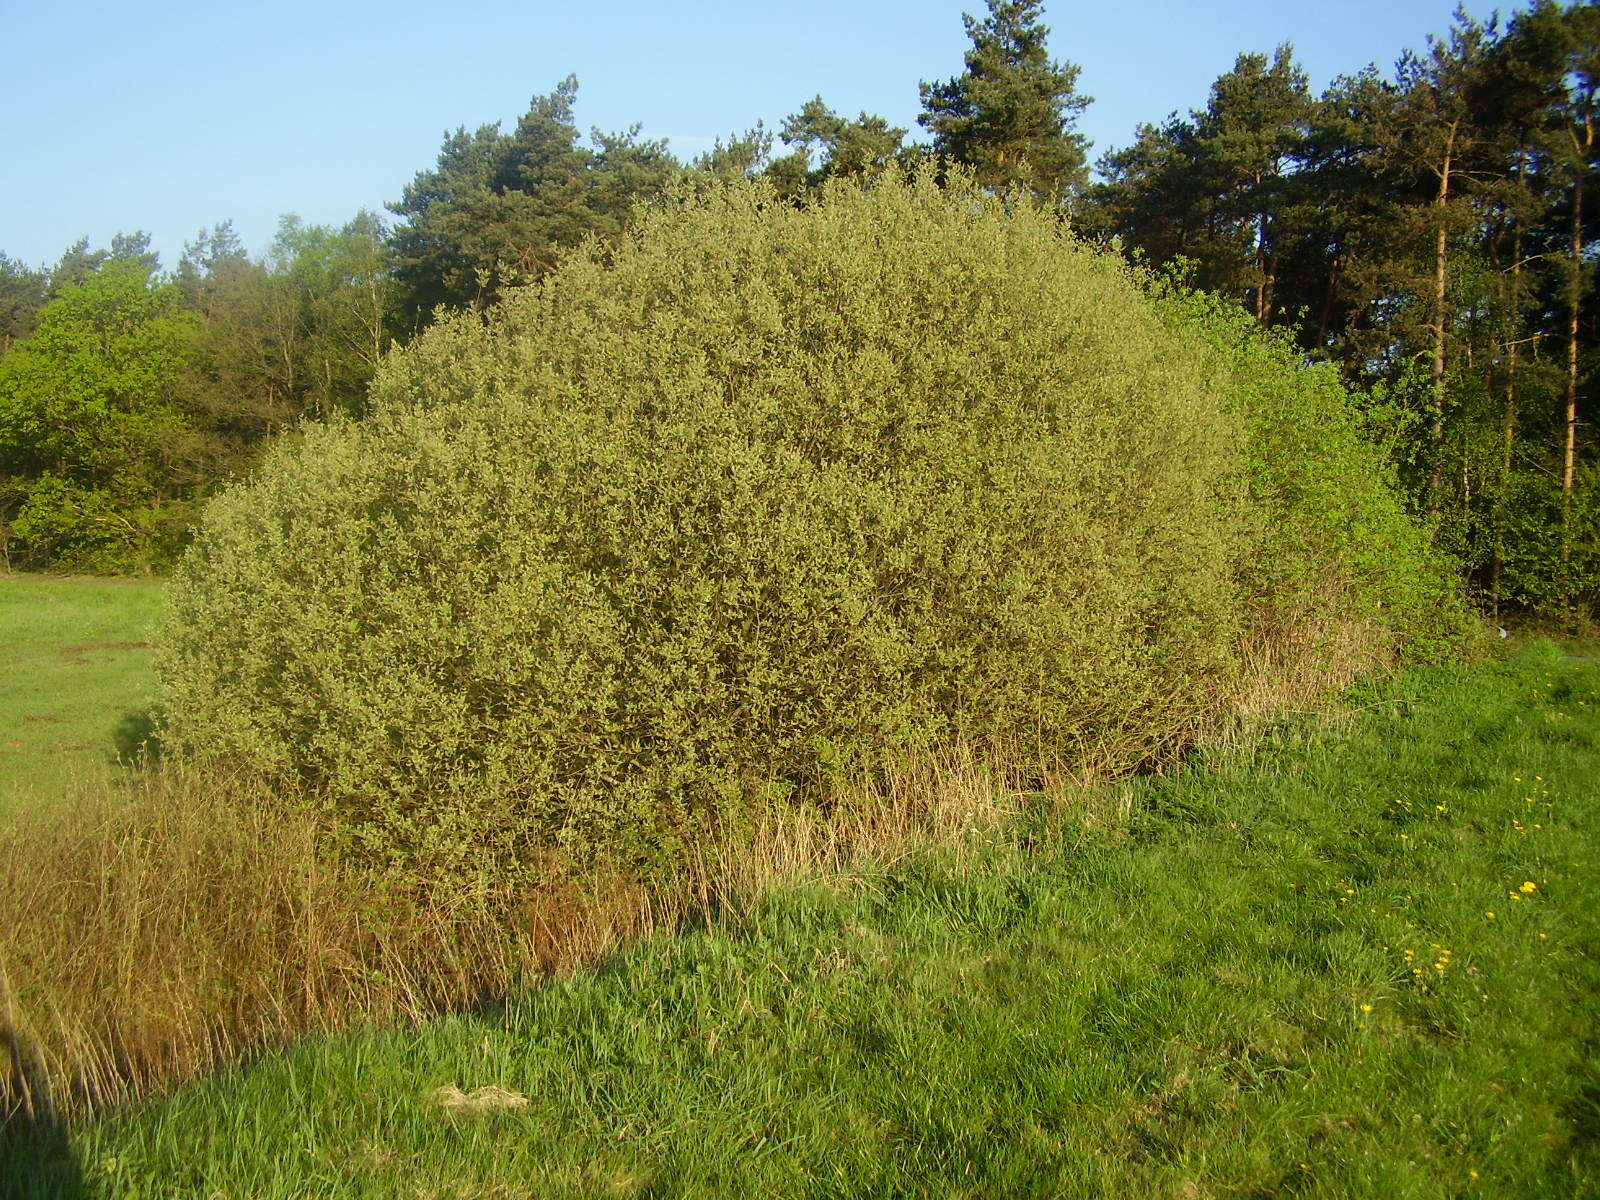 Image of Grey Willow